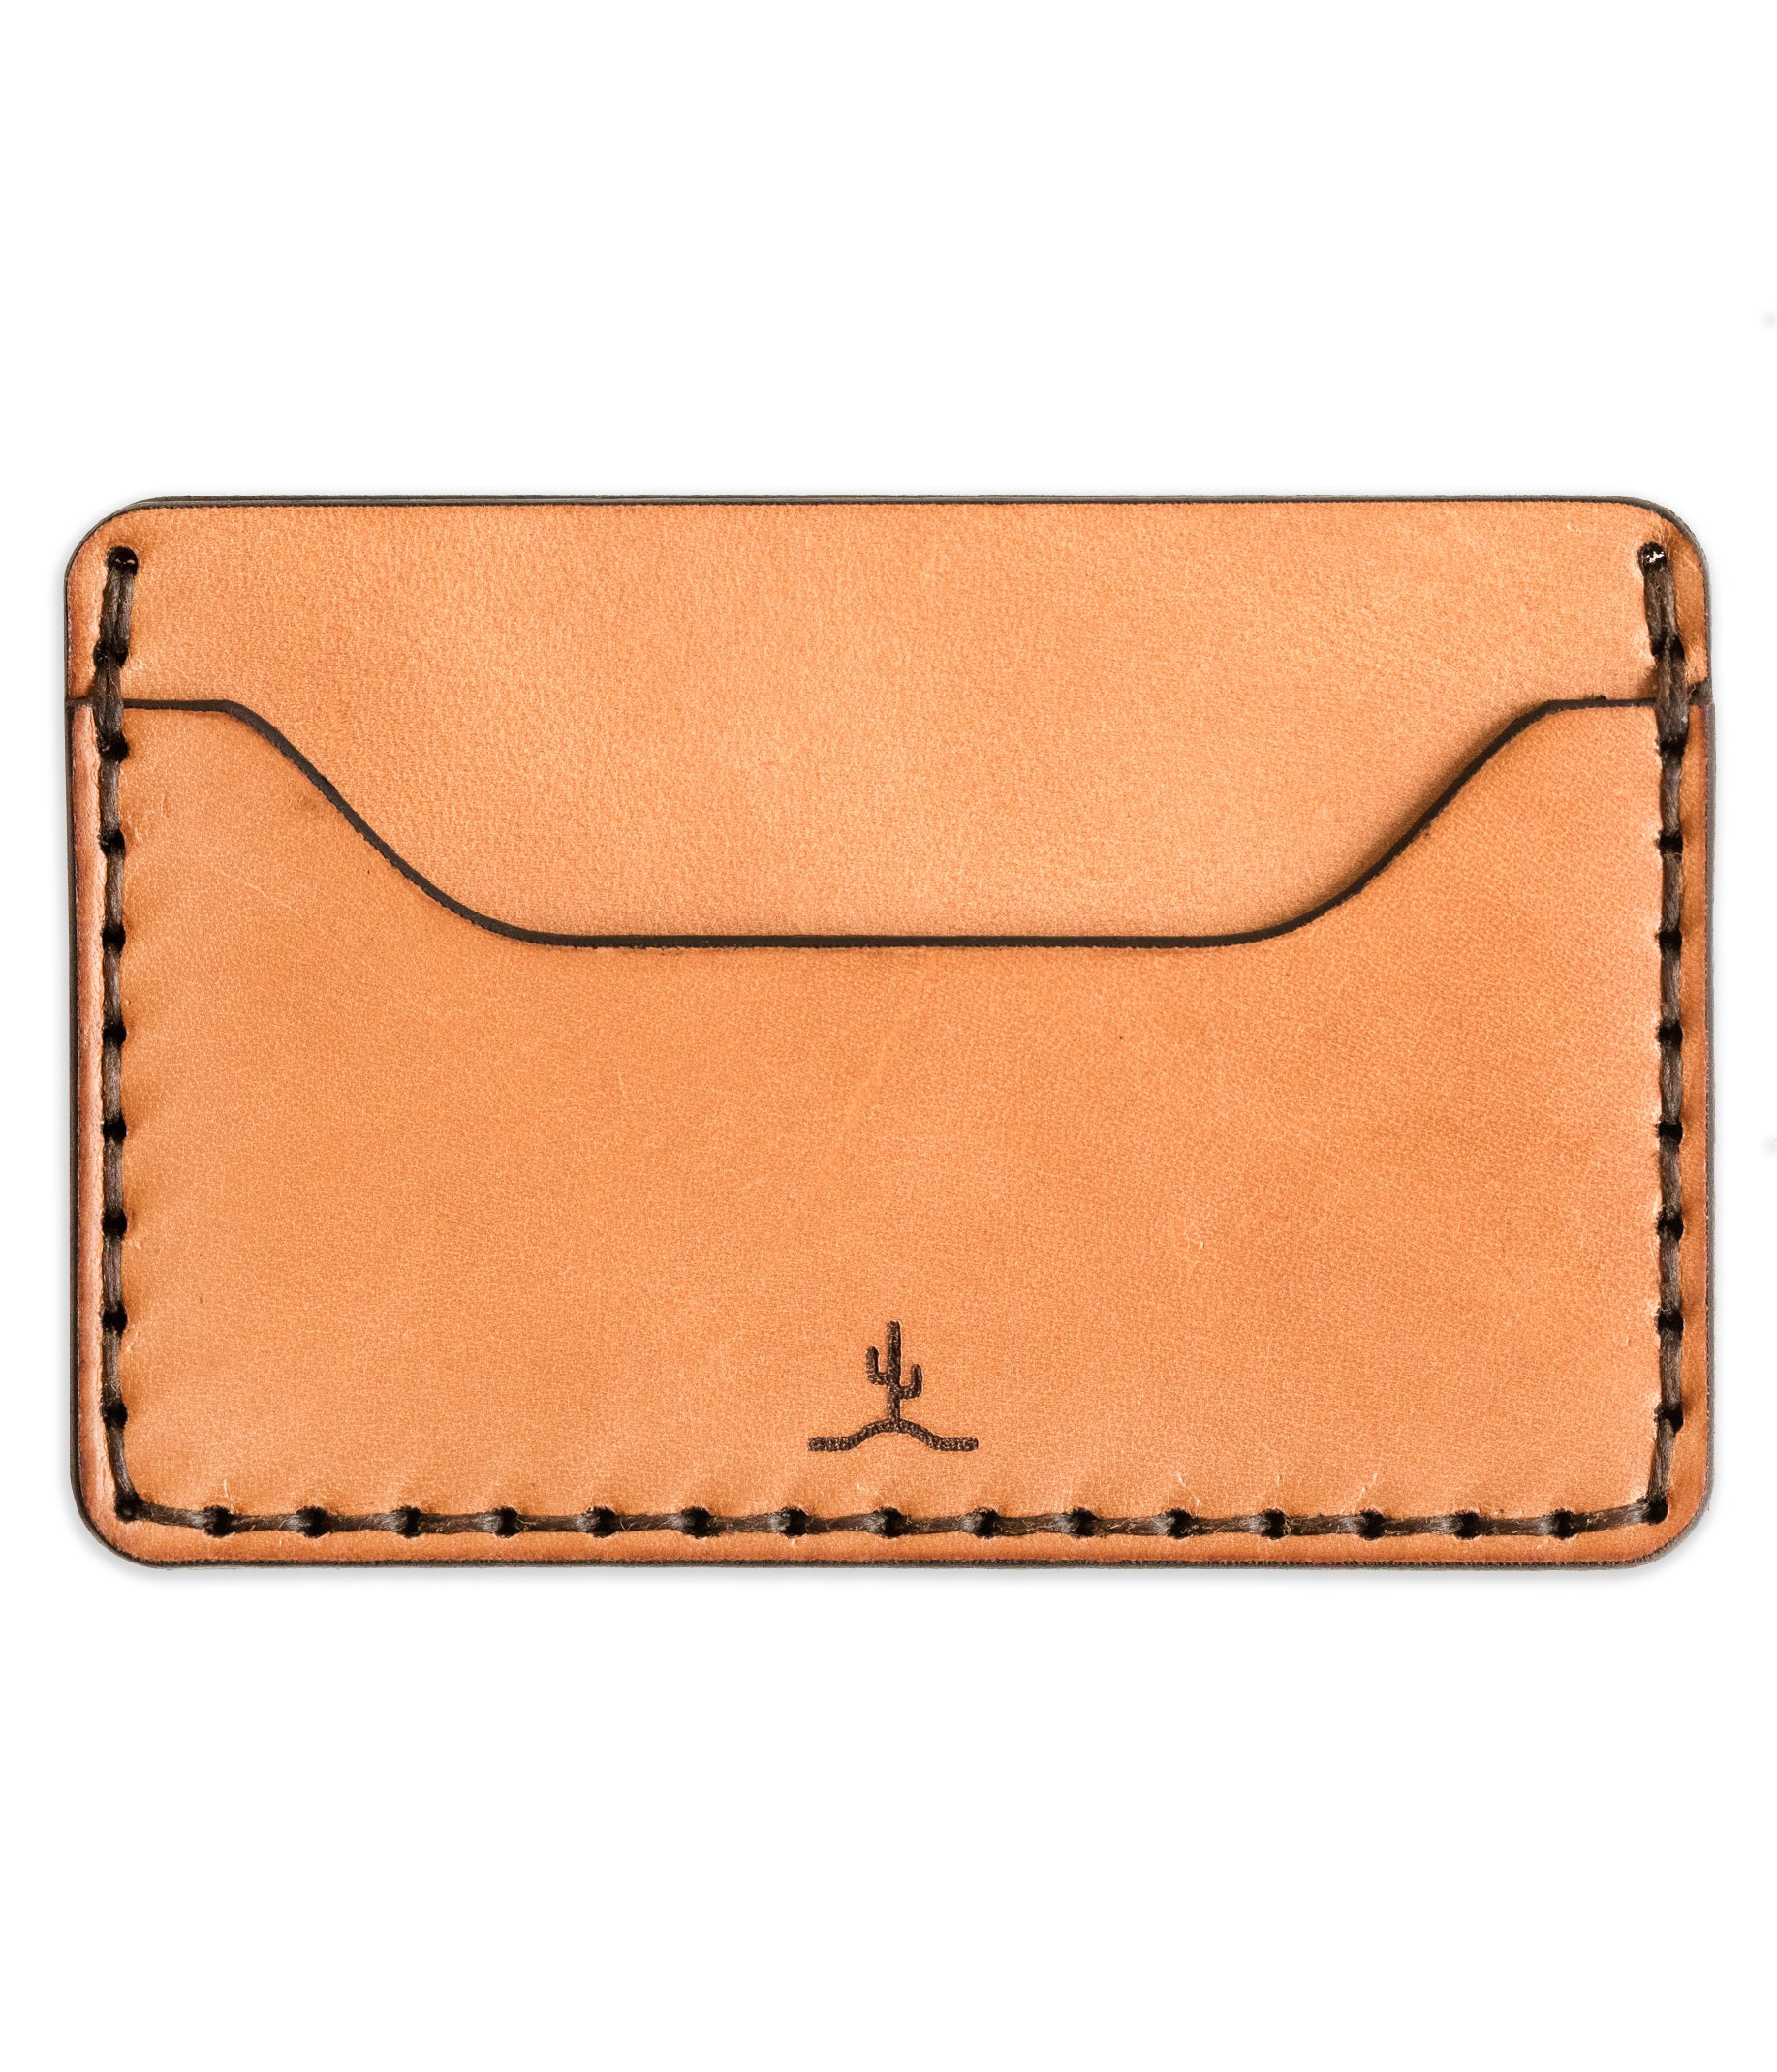 russet brown color leather slim wallet with two card pockets